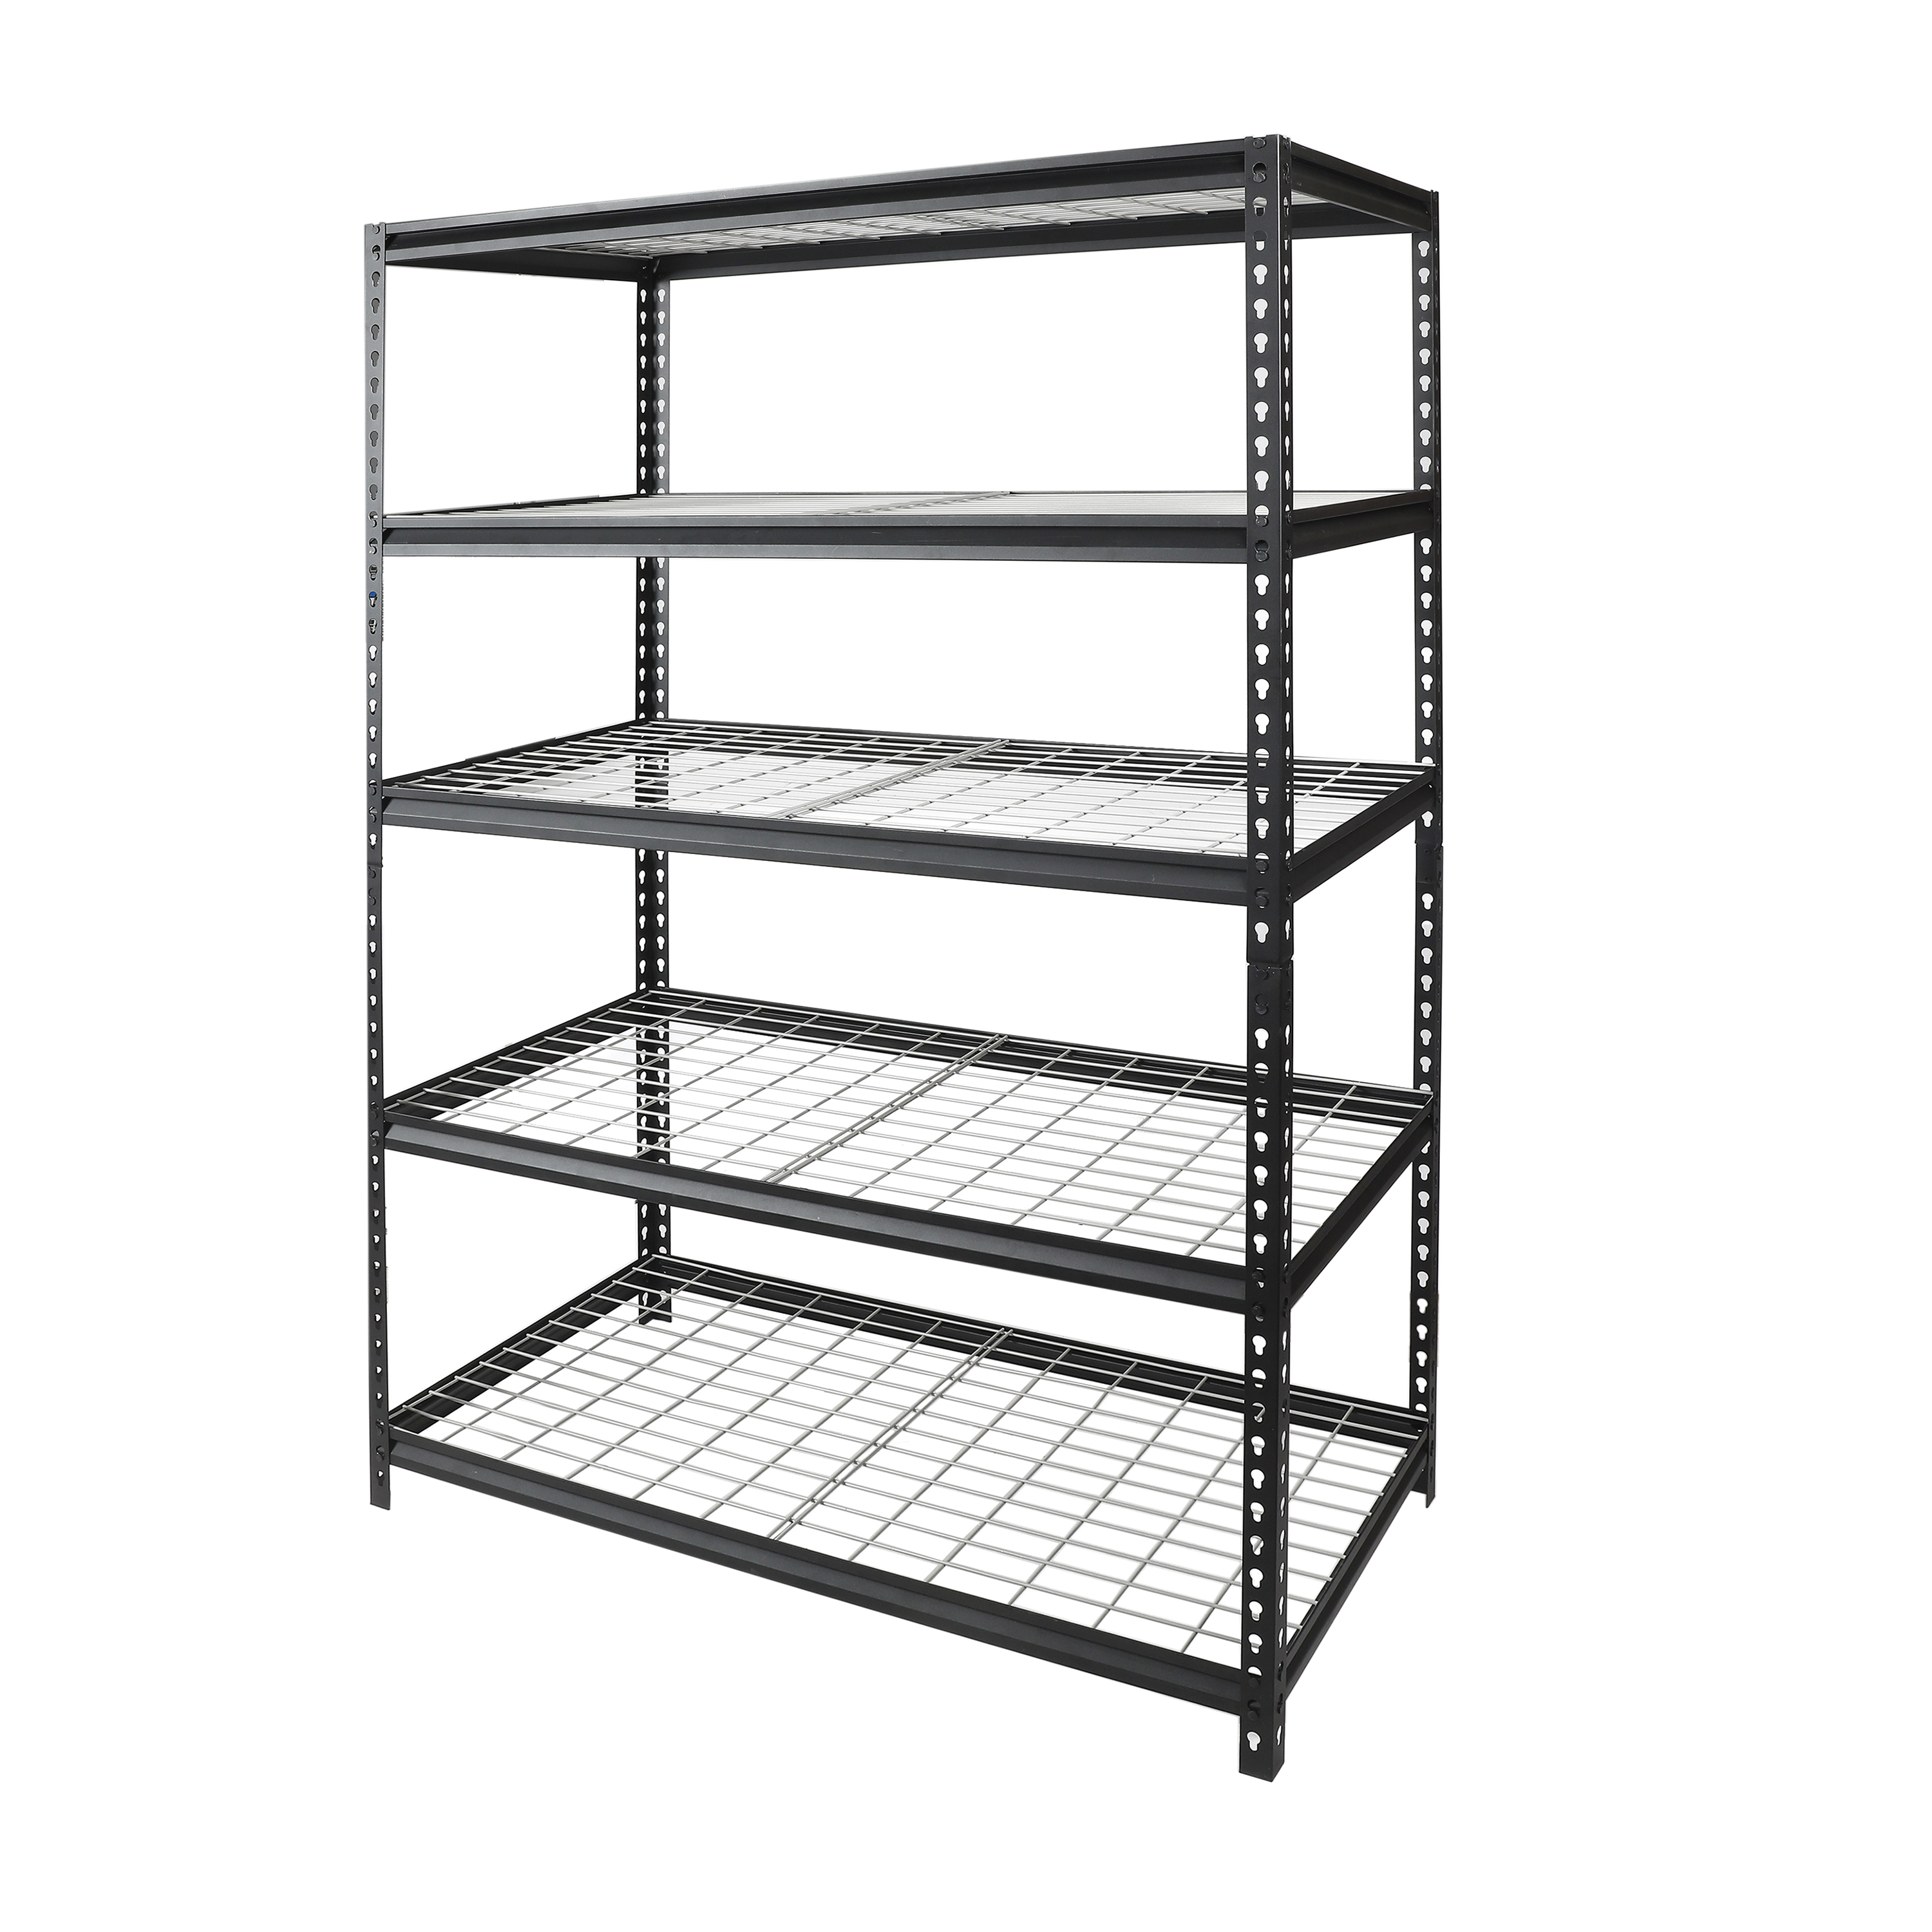 WORKPRO 48-Inch W x 24-Inch D x 72-Inch H 5-Shelf Freestanding Shelves, 4000 lbs. Capacity, Adult - image 1 of 11